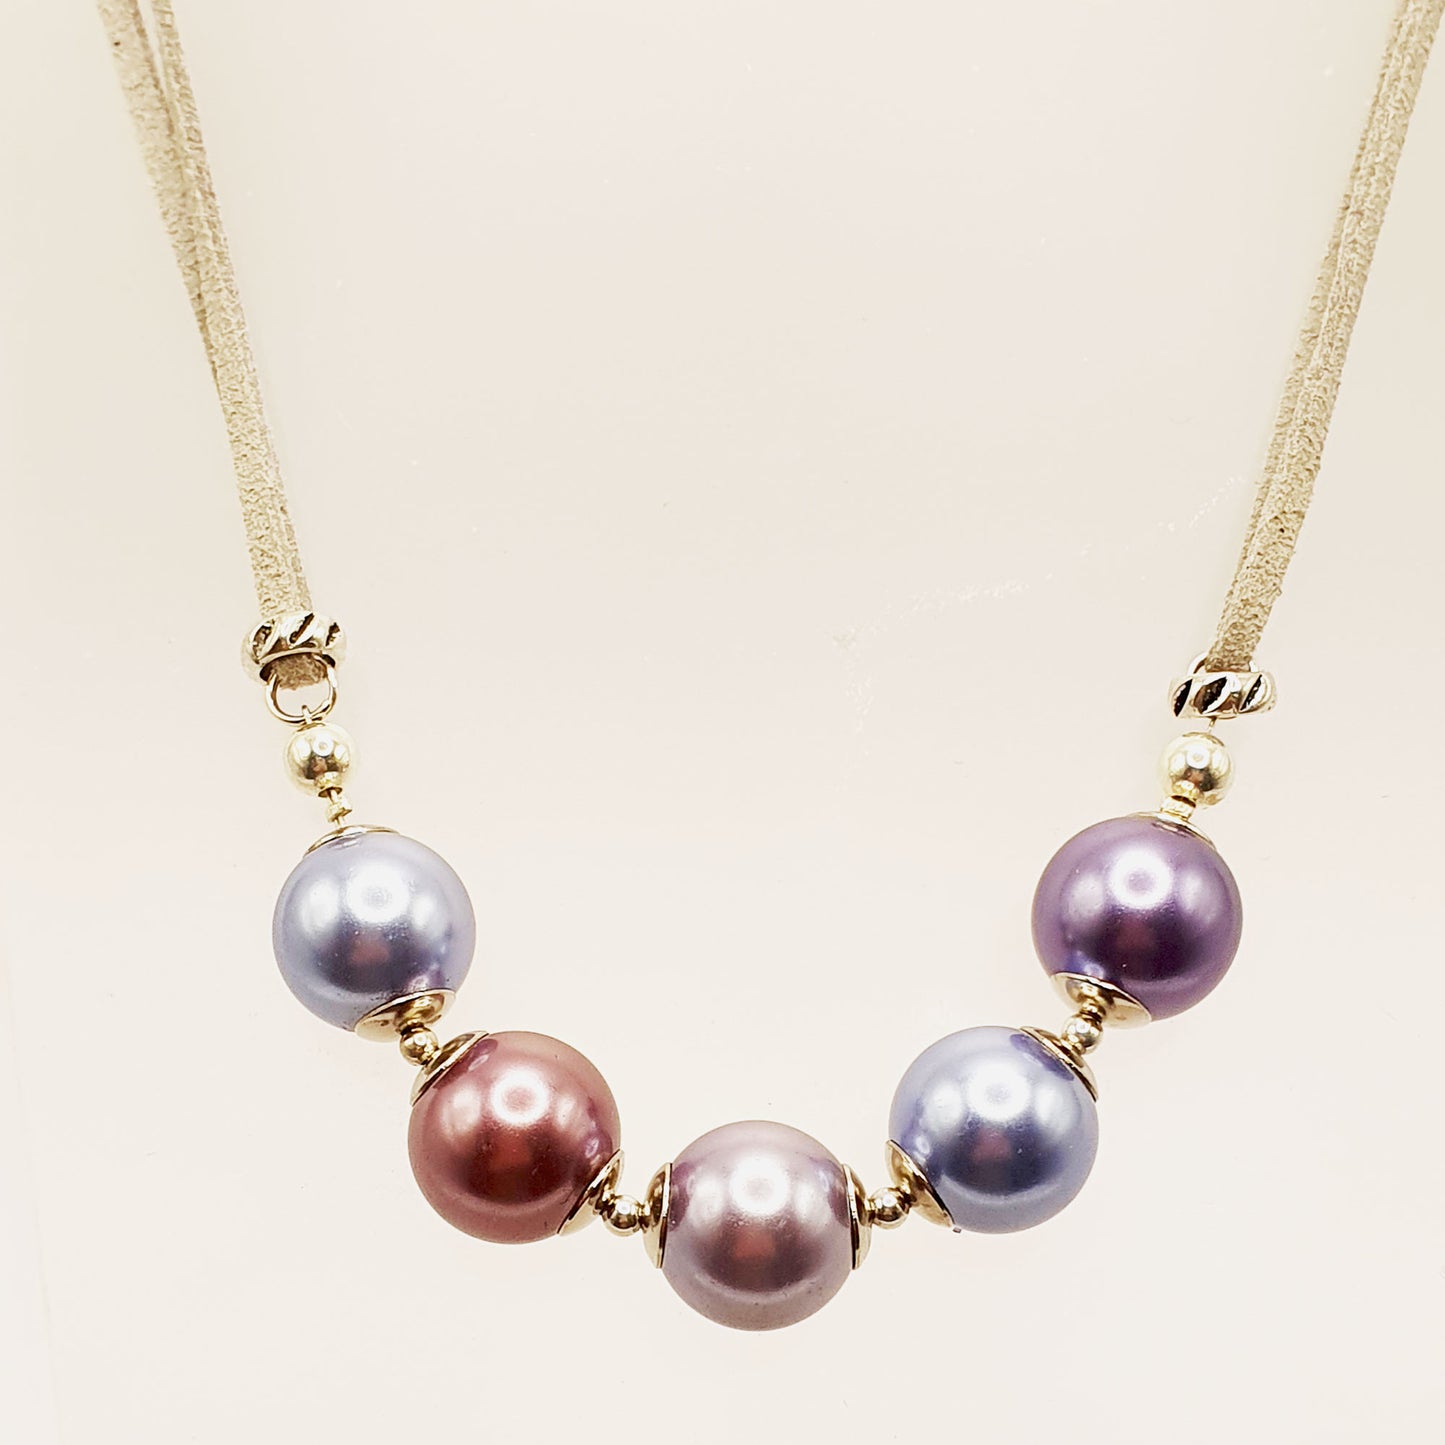 Glass pearl crescent necklace in purple and bronze tones